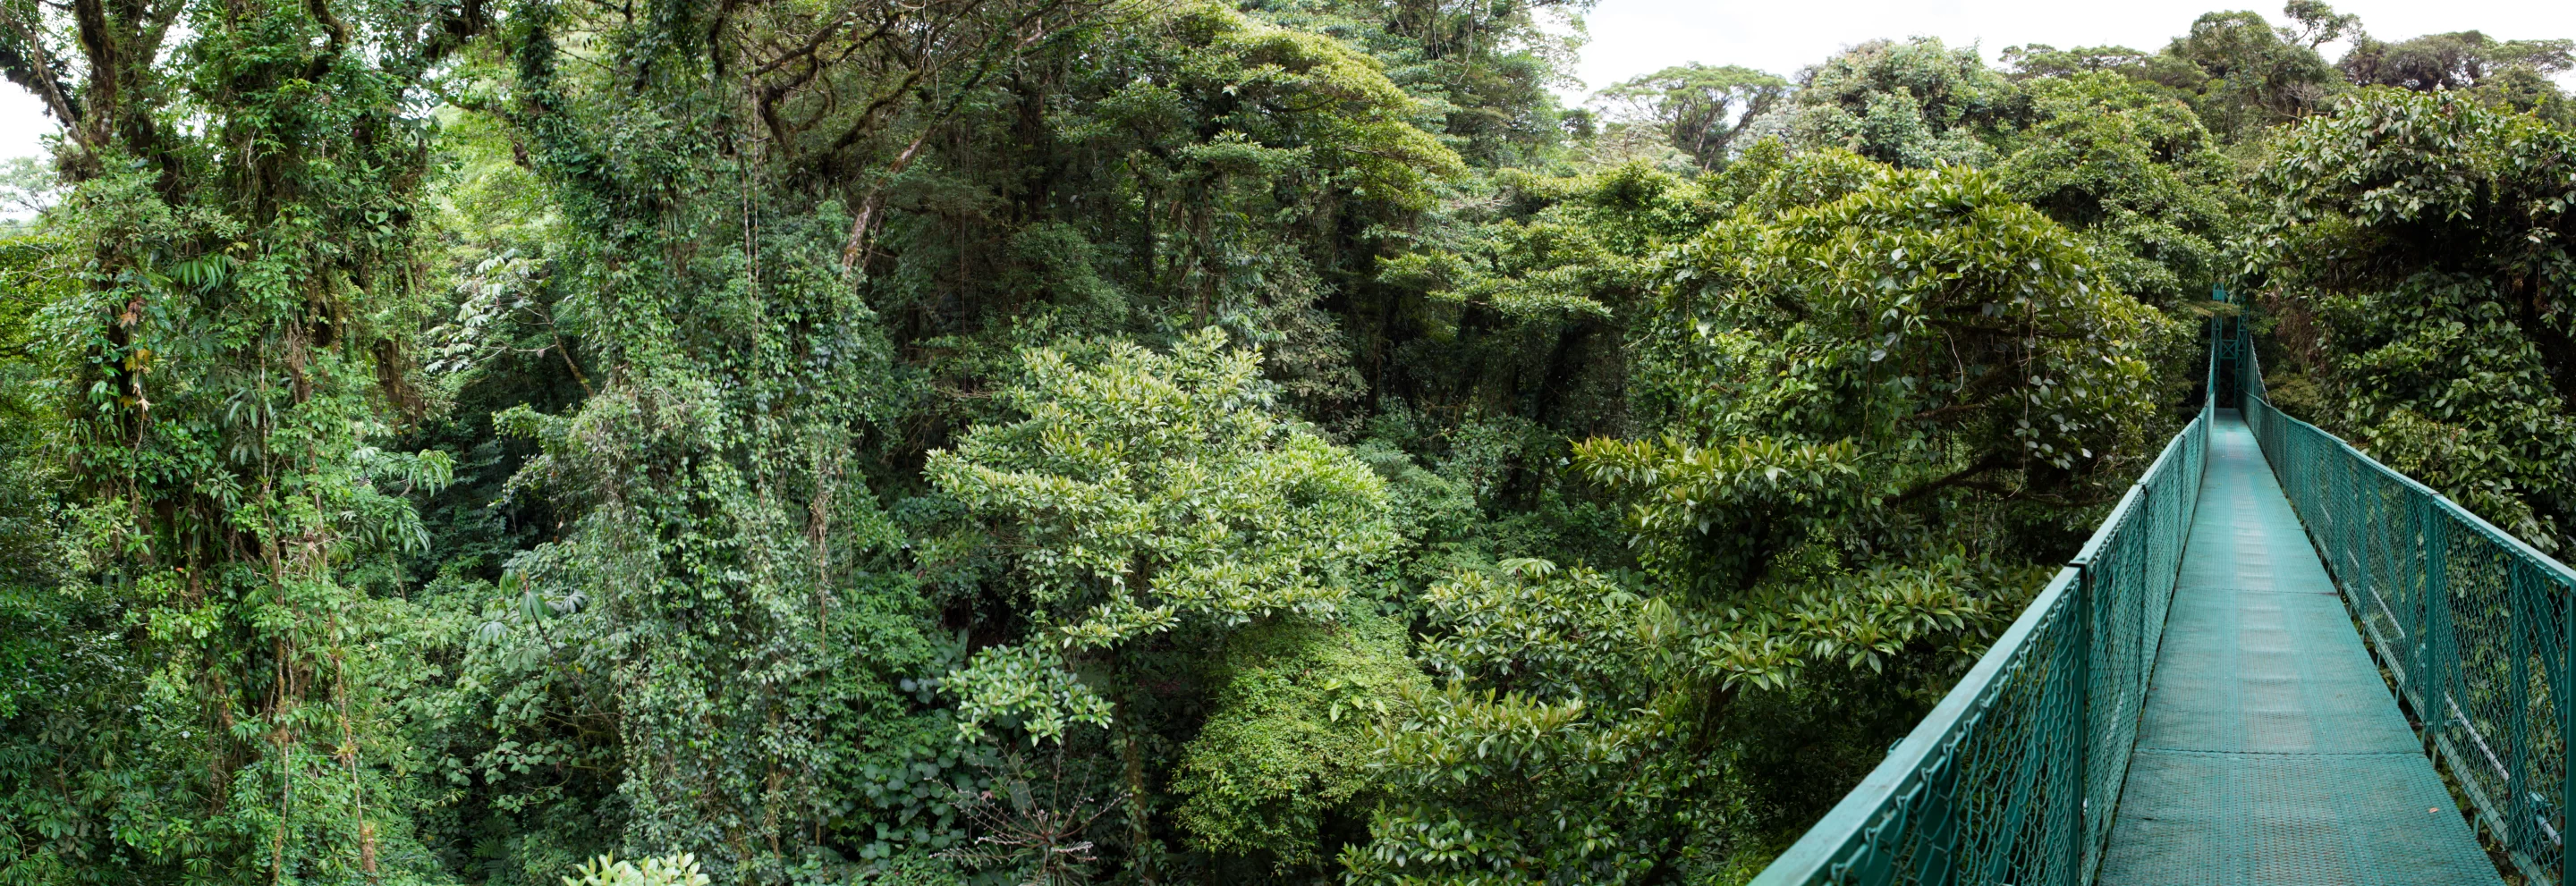 Learn more about two vital ecosystems in Monteverde that play a crucial role in biodiversity and sustainability.